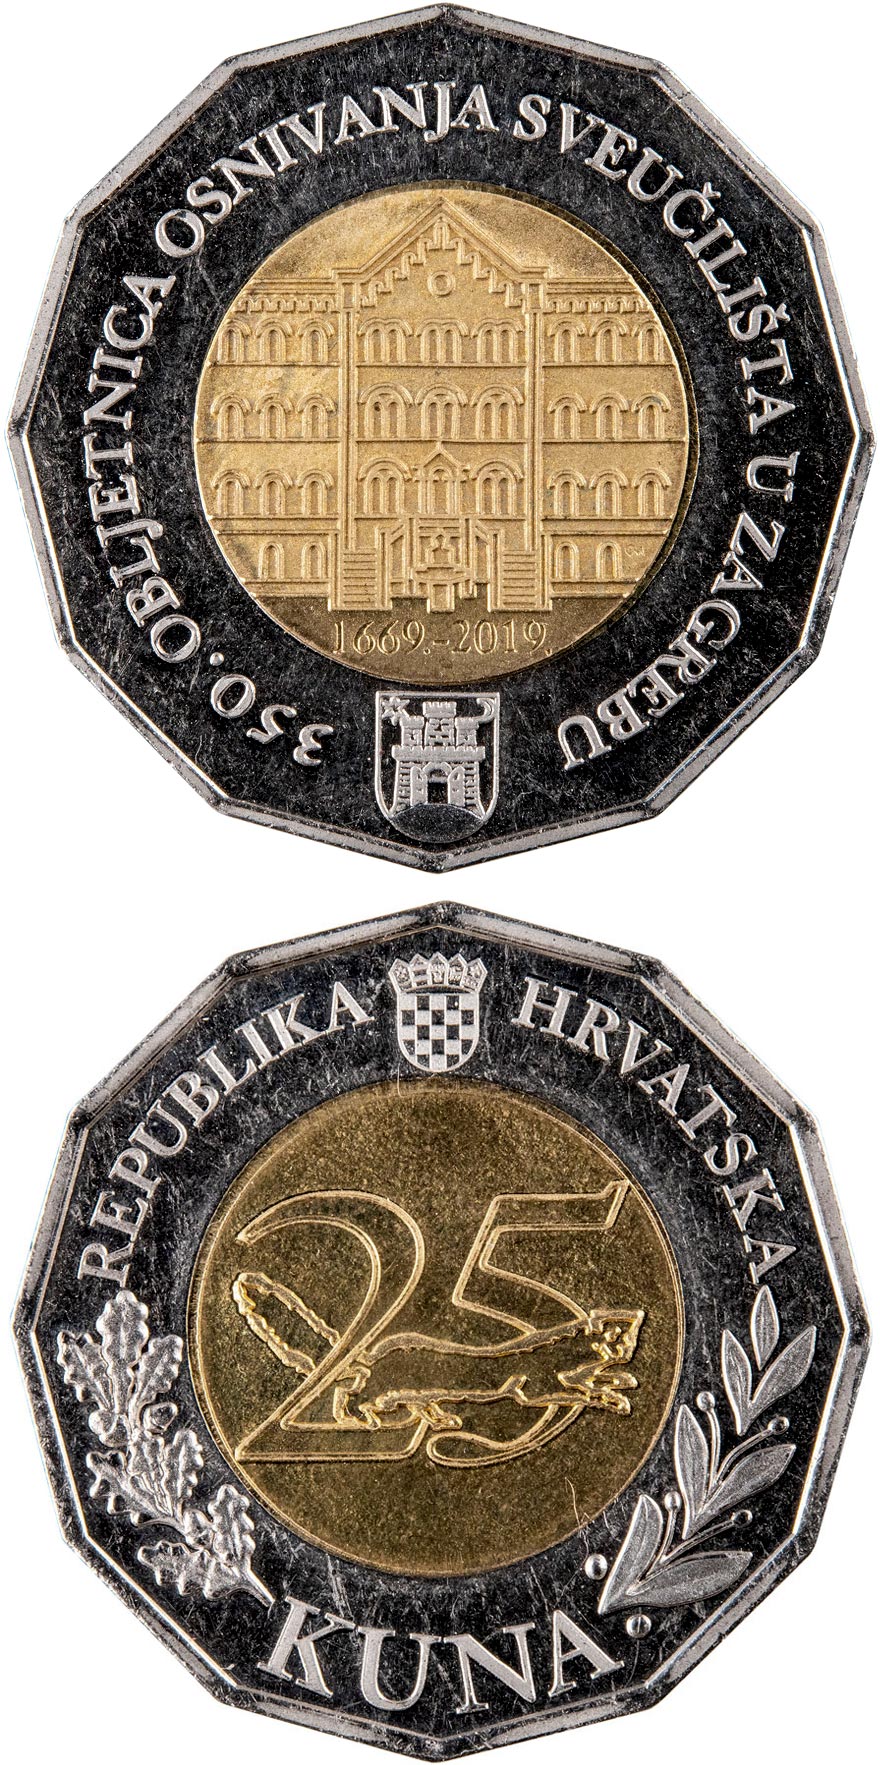 Image of 25 kuna coin - 350th Anniversary of the Founding of the University of Zagreb | Croatia 2019.  The Copper–Nickel (CuNi) coin is of BU quality.